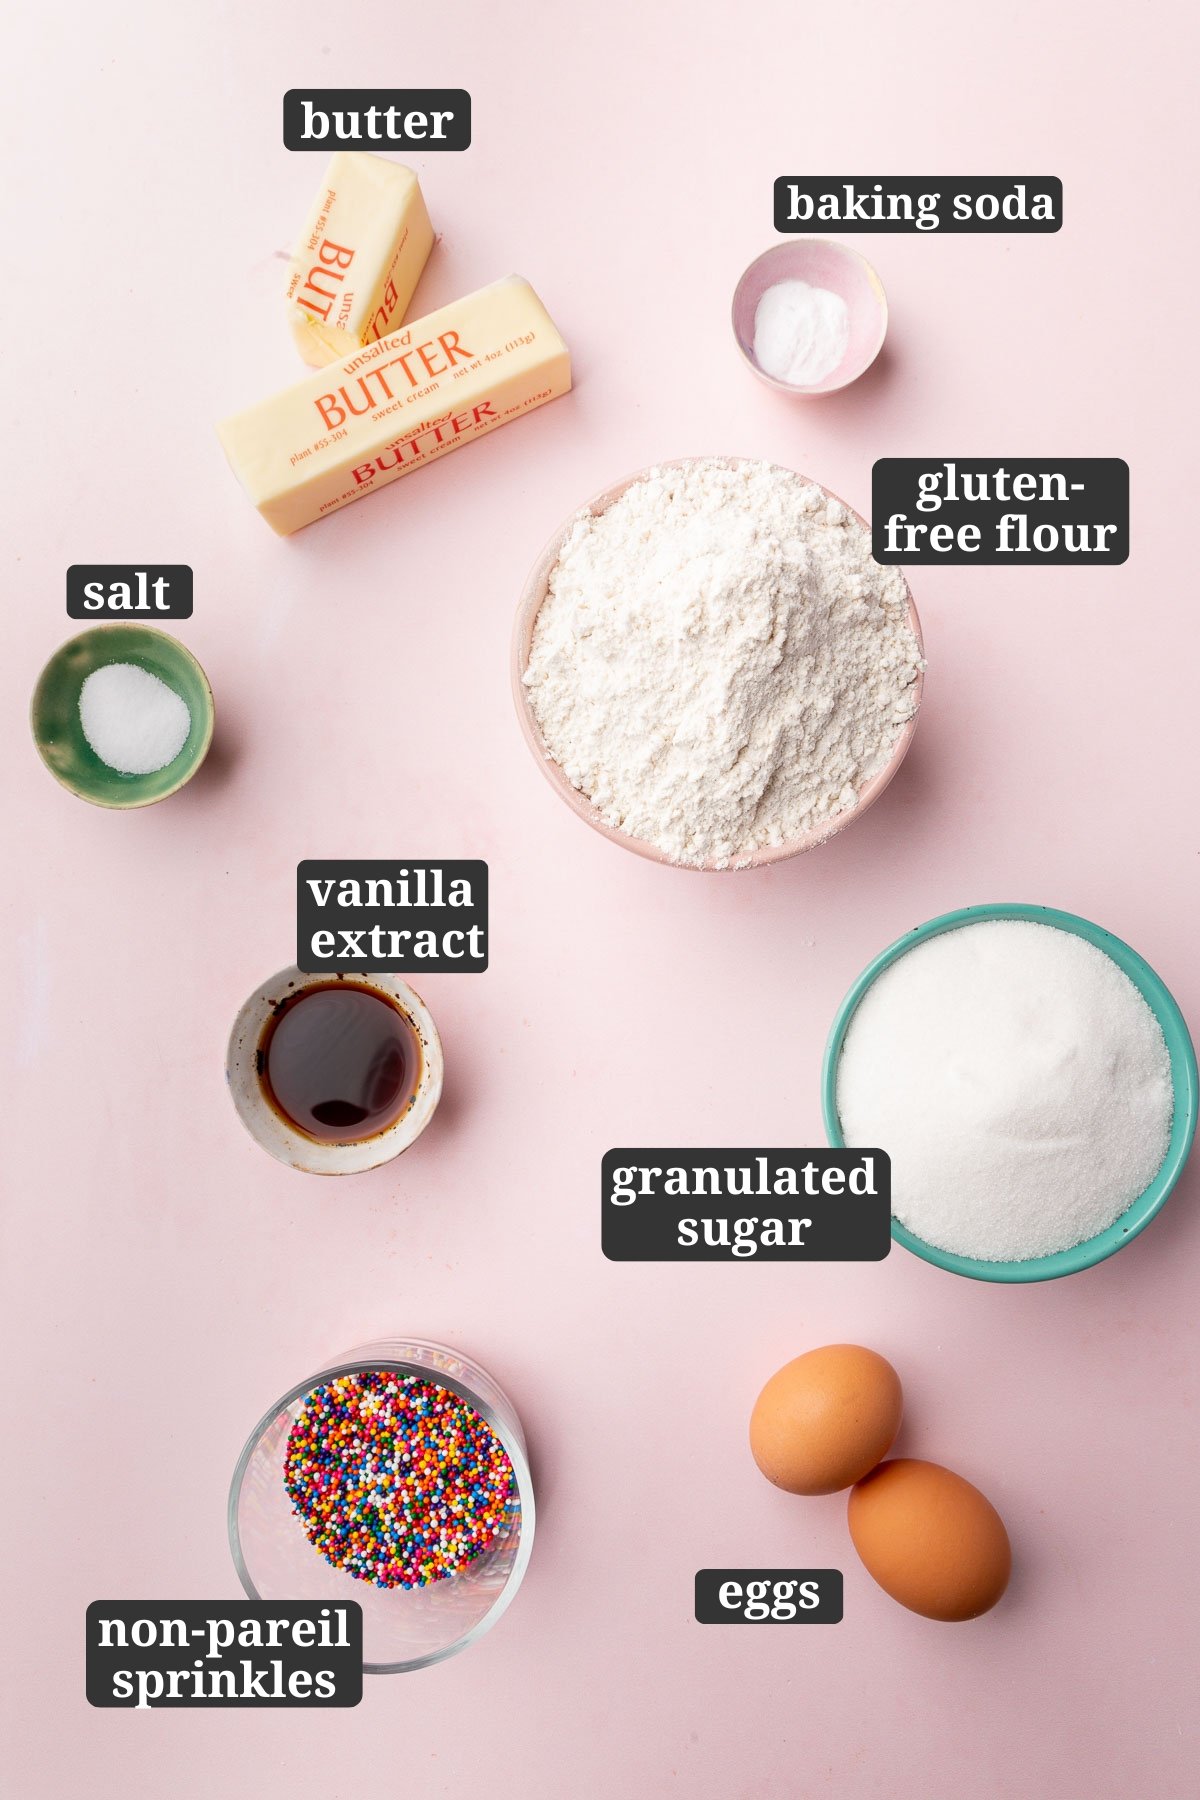 Ingredients in small bowls to make gluten-free sprinkles sugar cookies, including butter, baking soda, salt, gluten-free flour, vanilla, sugar, non-pareil sprinkles and eggs with text overlays over each ingredient.